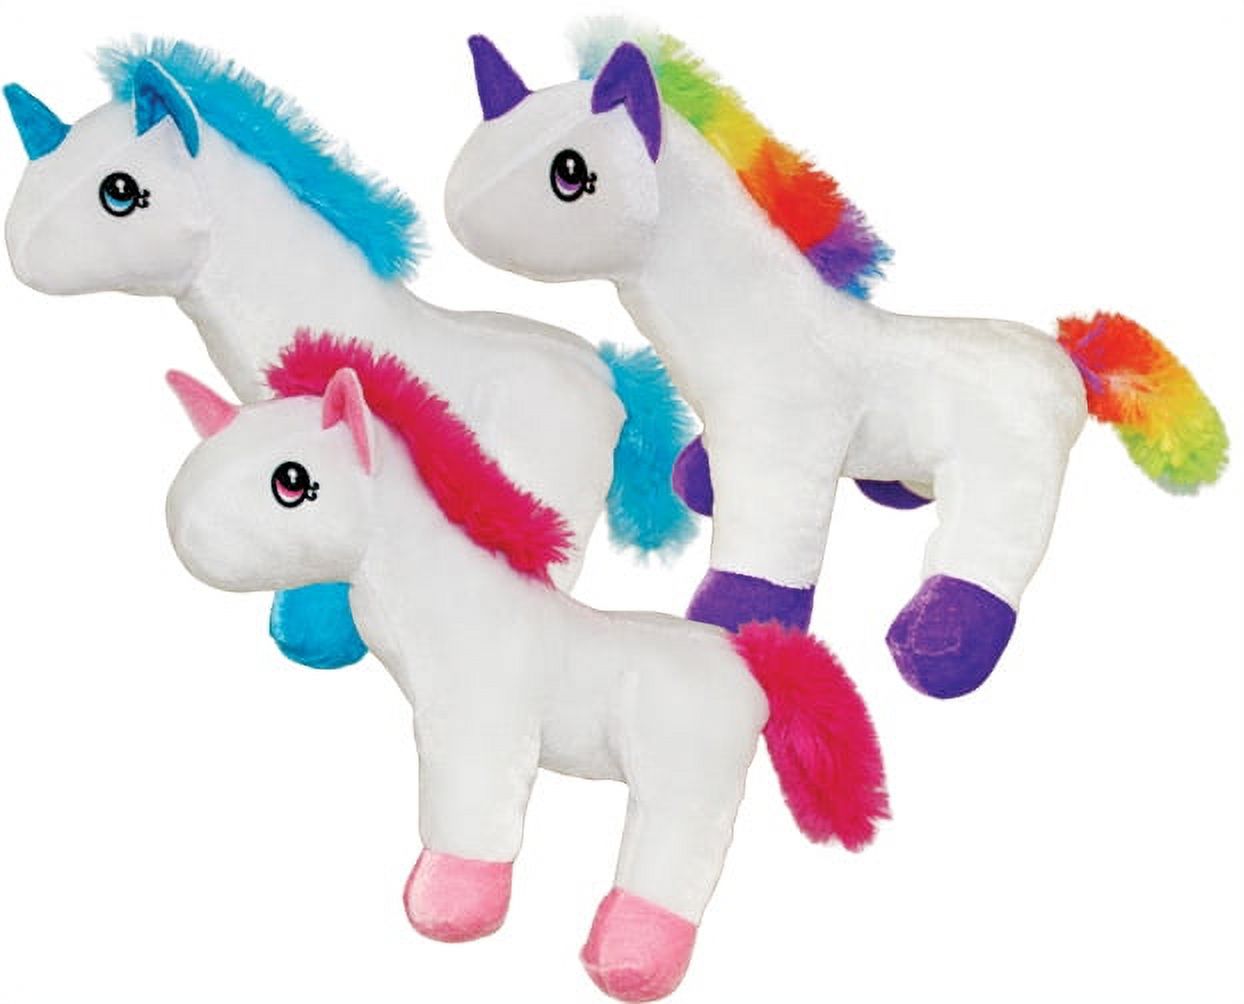 Plush Pal 12" Soft & Fluffy Blue Unicorn Stuffed Animal Toy with Blue Teal Tail And Mane - image 2 of 6